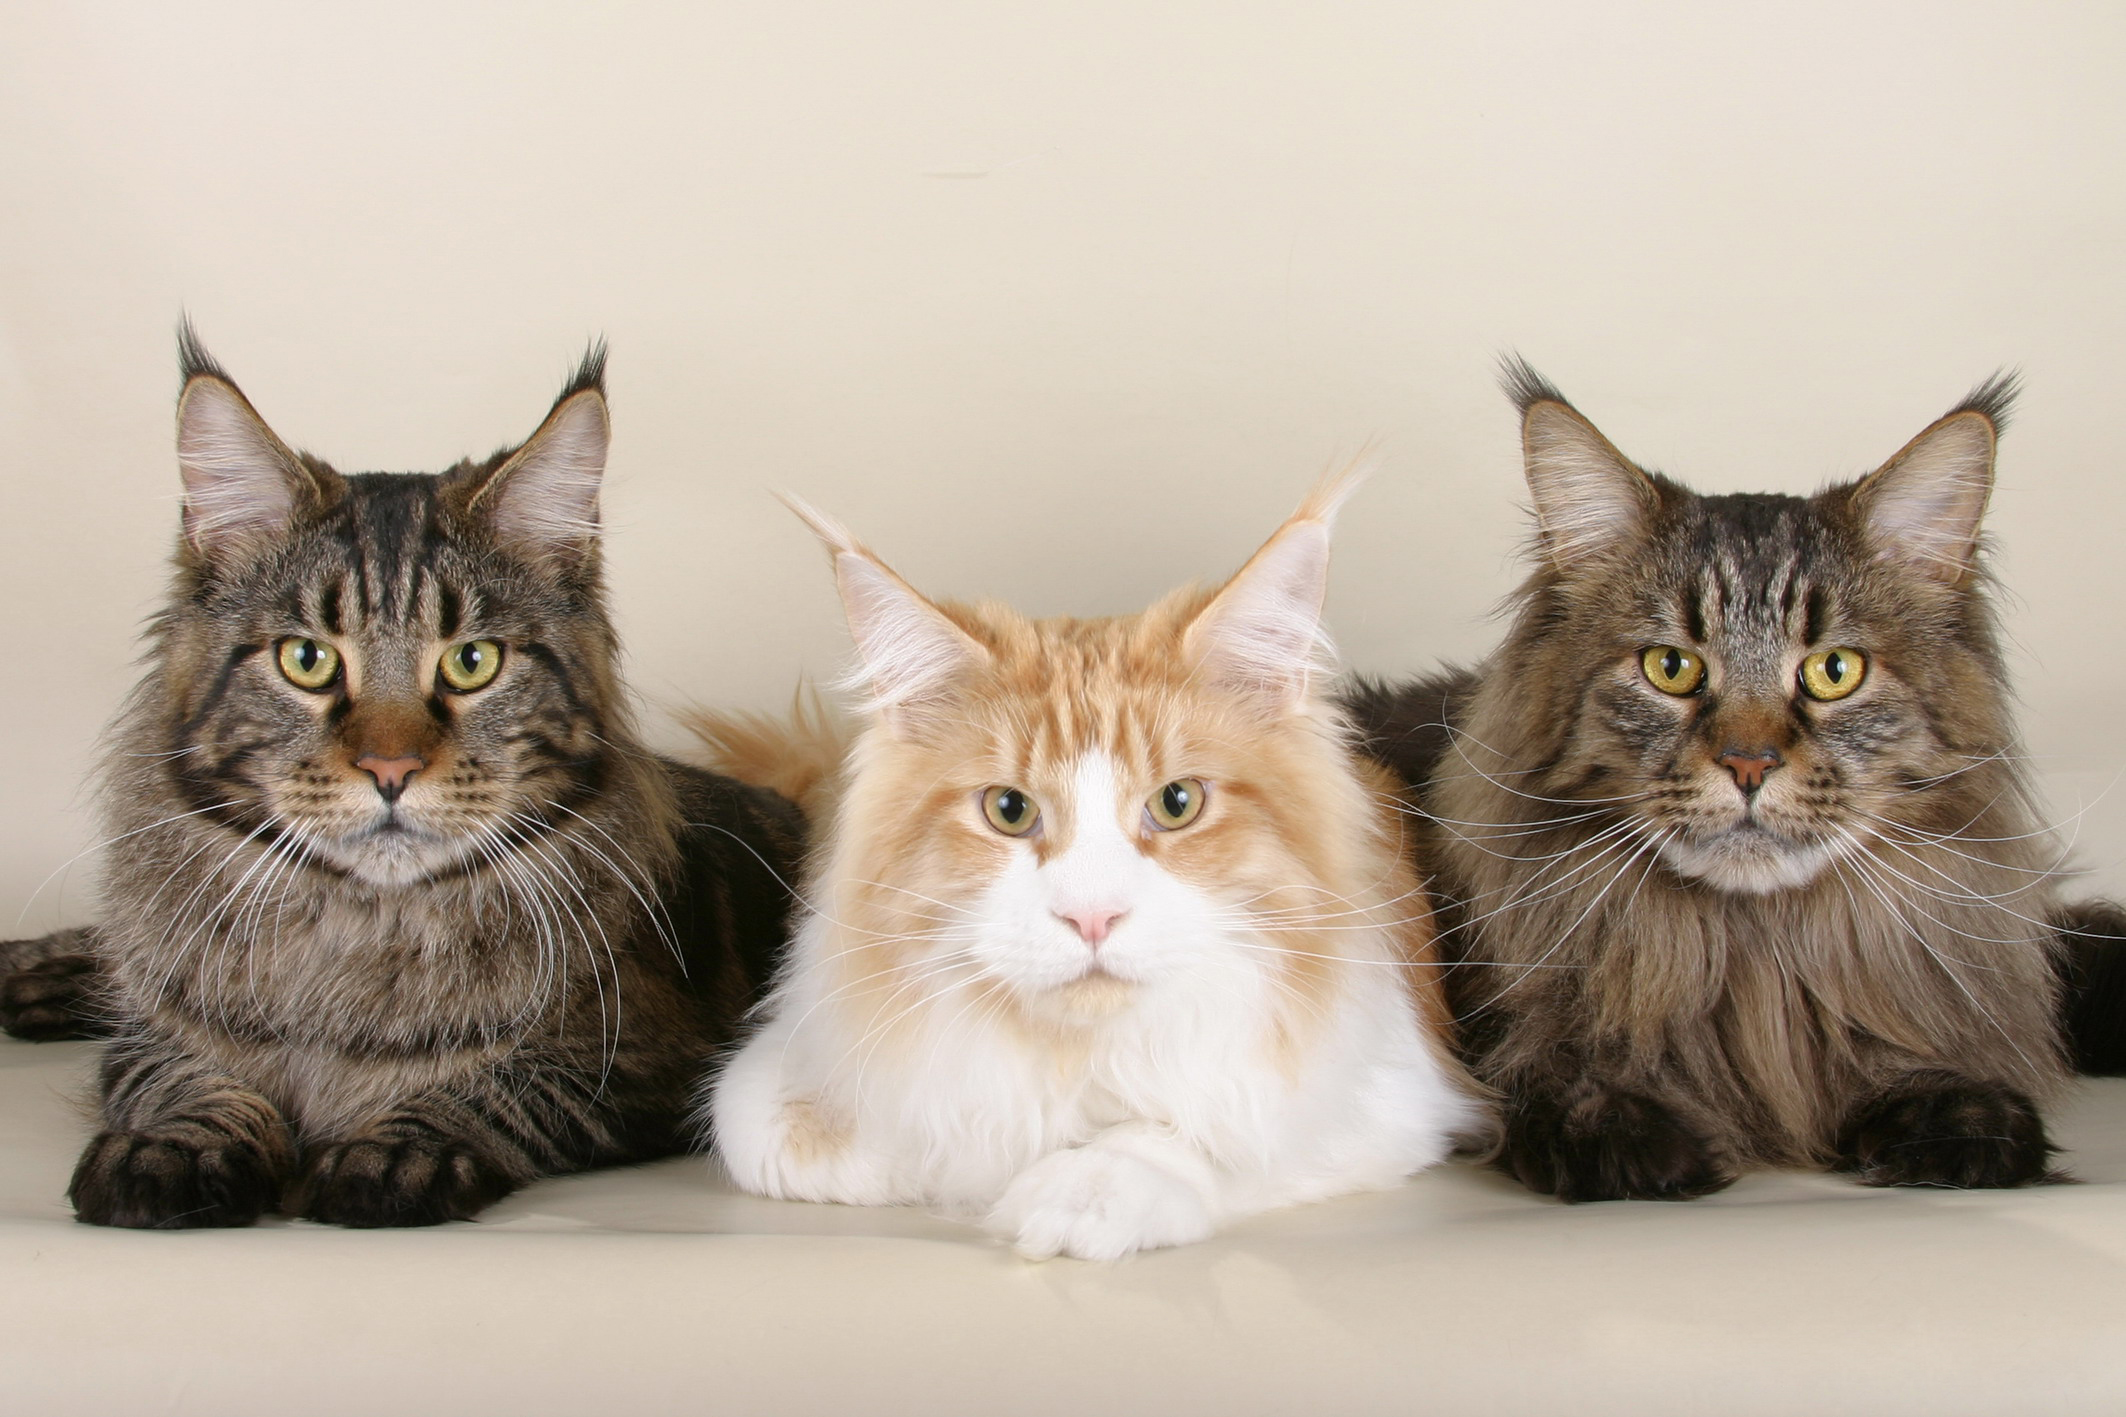 Maine Coons of different colors